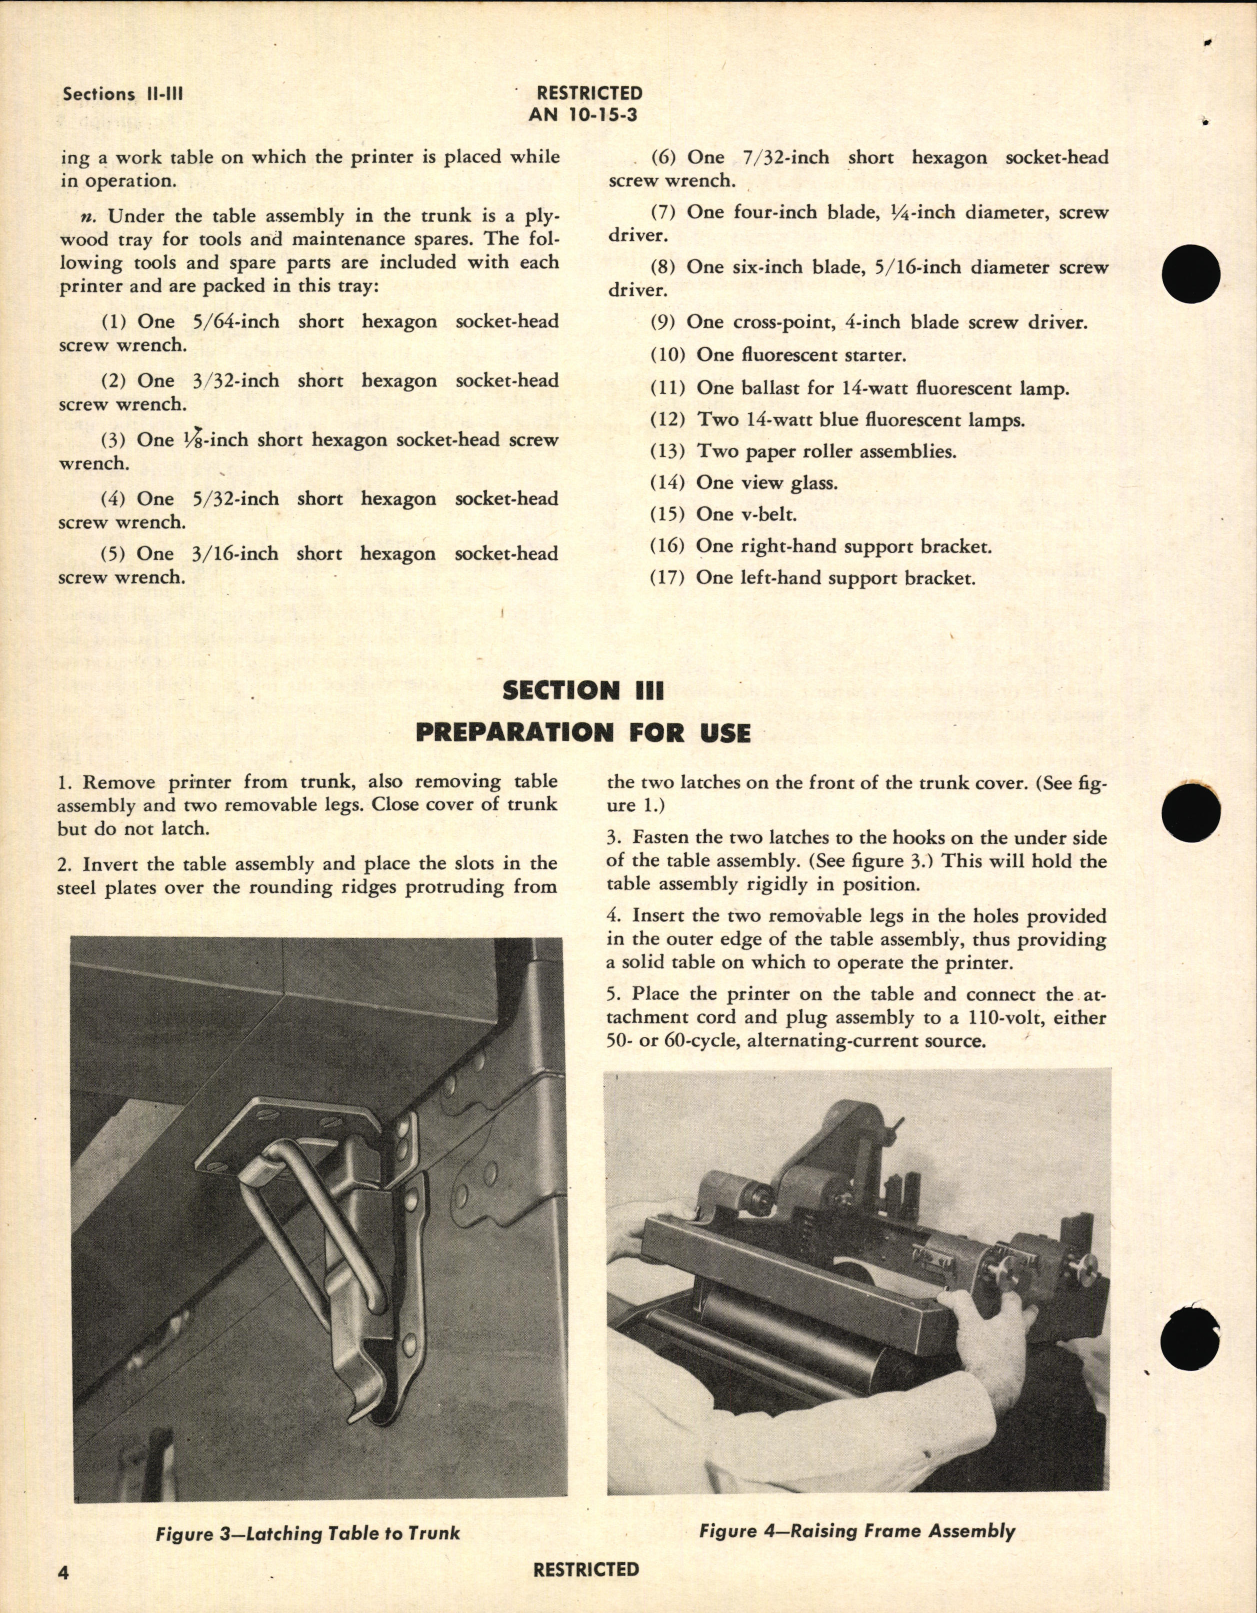 Sample page 8 from AirCorps Library document: Handbook of Instructions with Parts Catalog for Type C-1 Continuous Printer